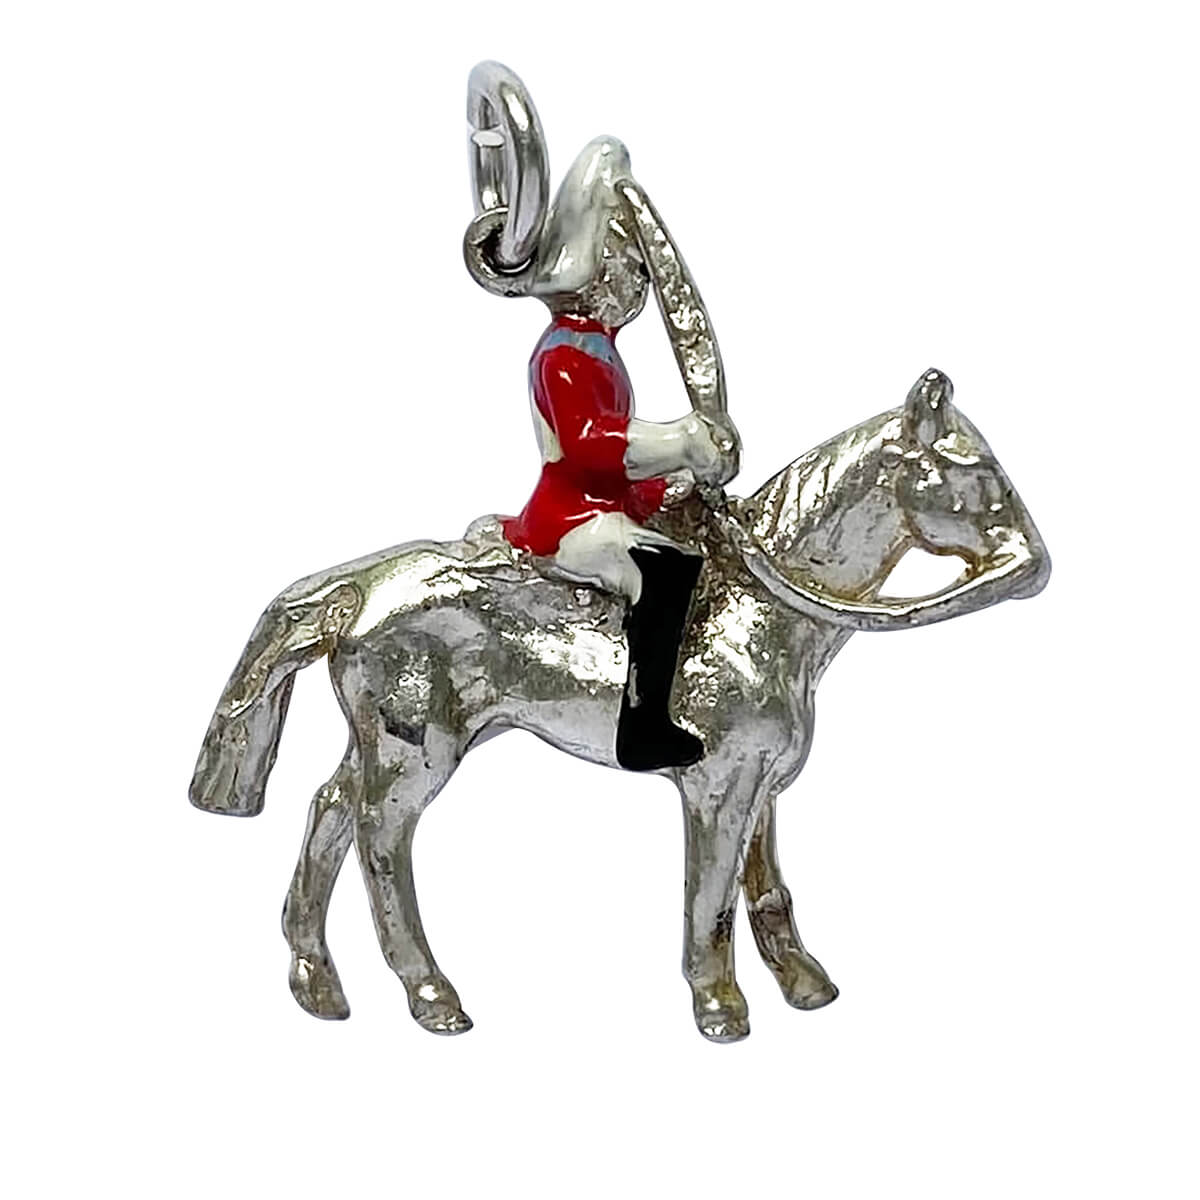 Vintage royal soldier on horse silver enamel English pendant from Charmarama Charms